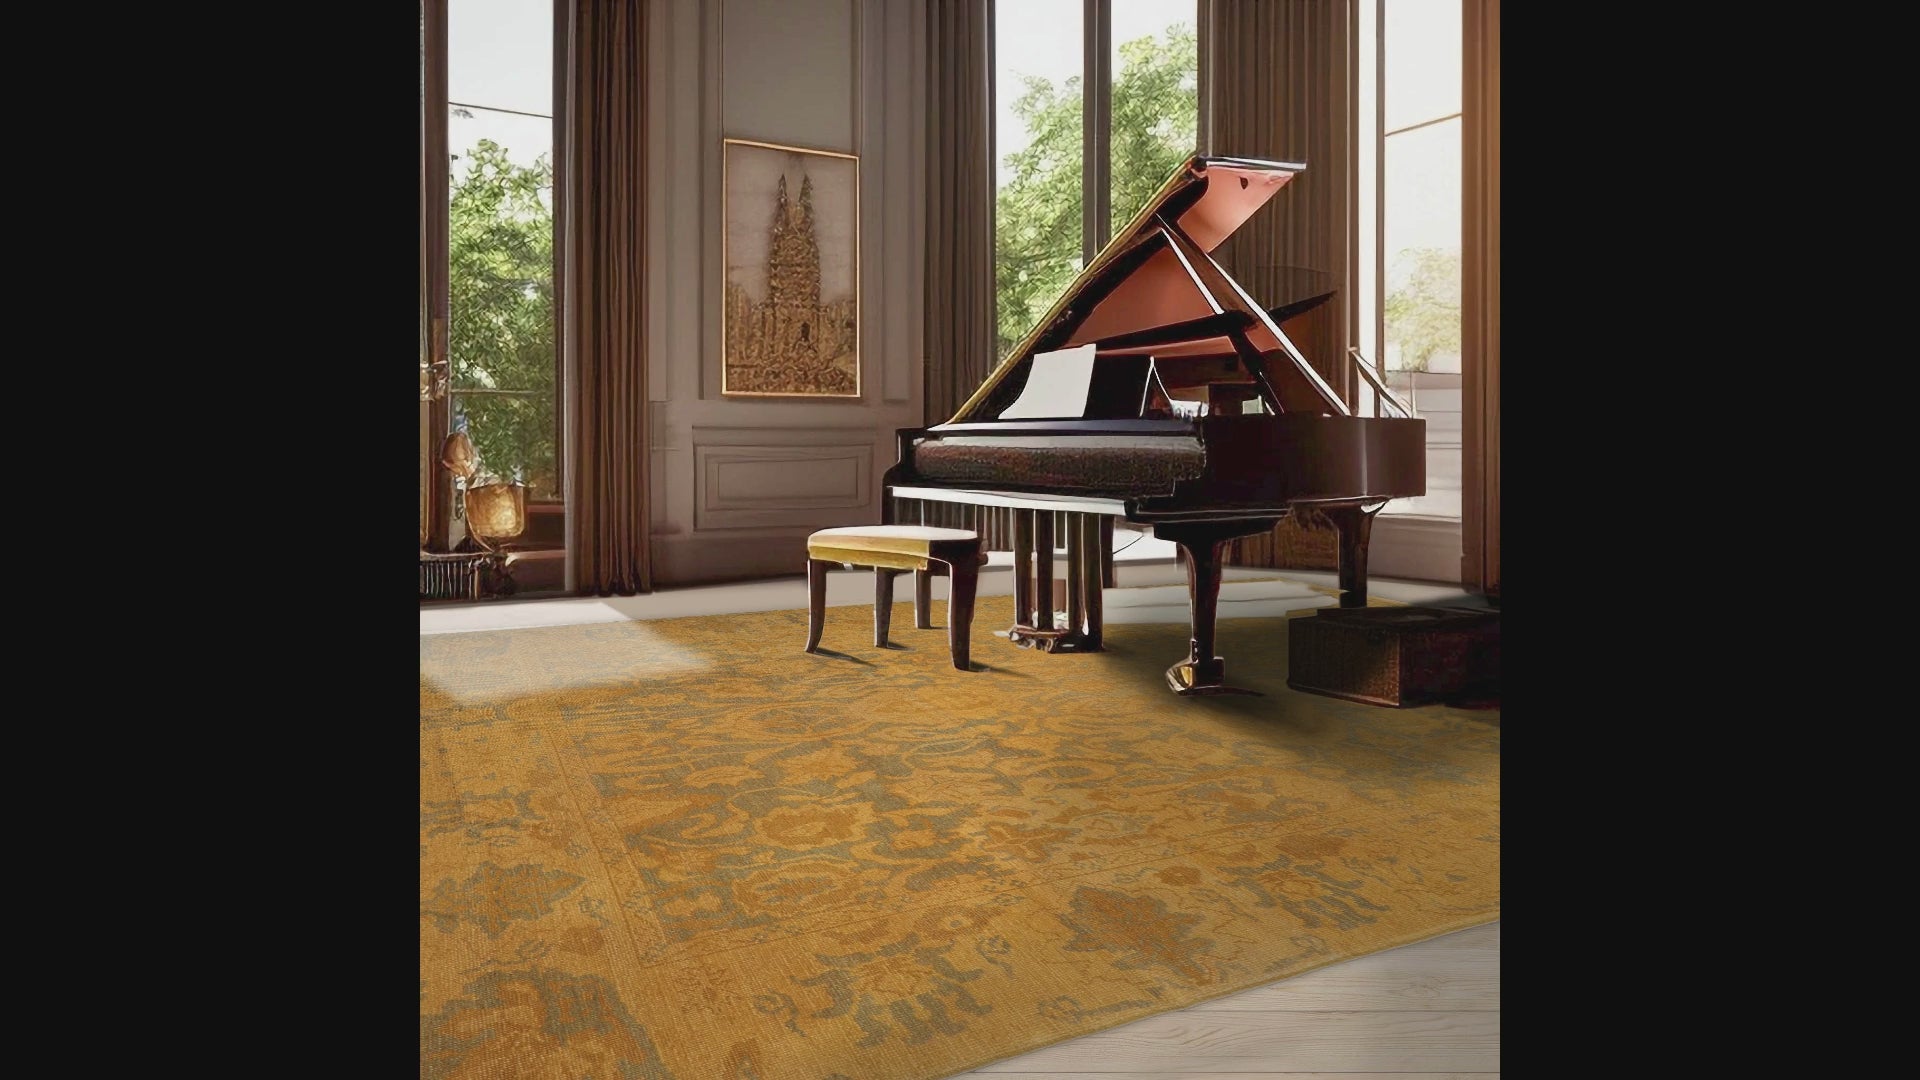 Alariz 9x12 Hand Knotted Turkish Oushak  100% Wool Arts & Crafts Oriental Area Rug Moss, Gold Color